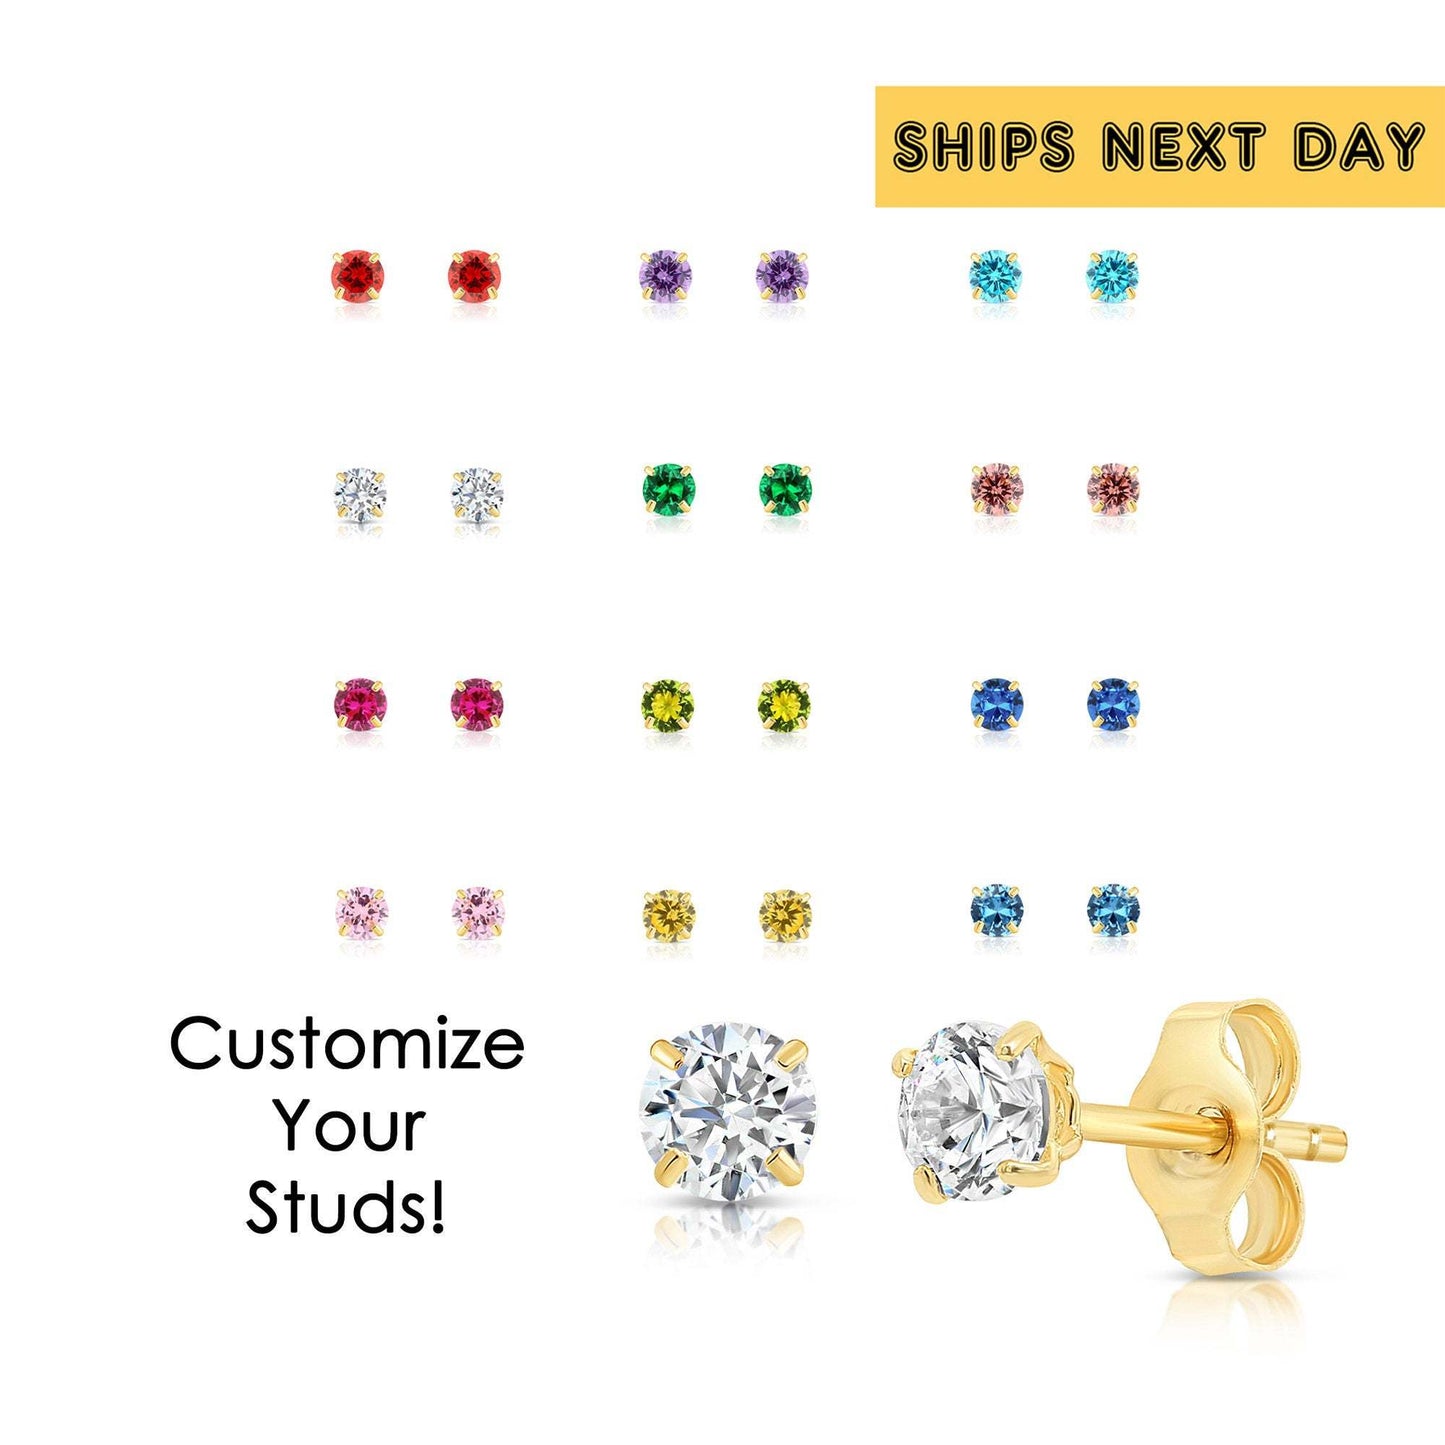 14k Yellow Gold Birthstone Solitaire Stud Earrings, 3mm